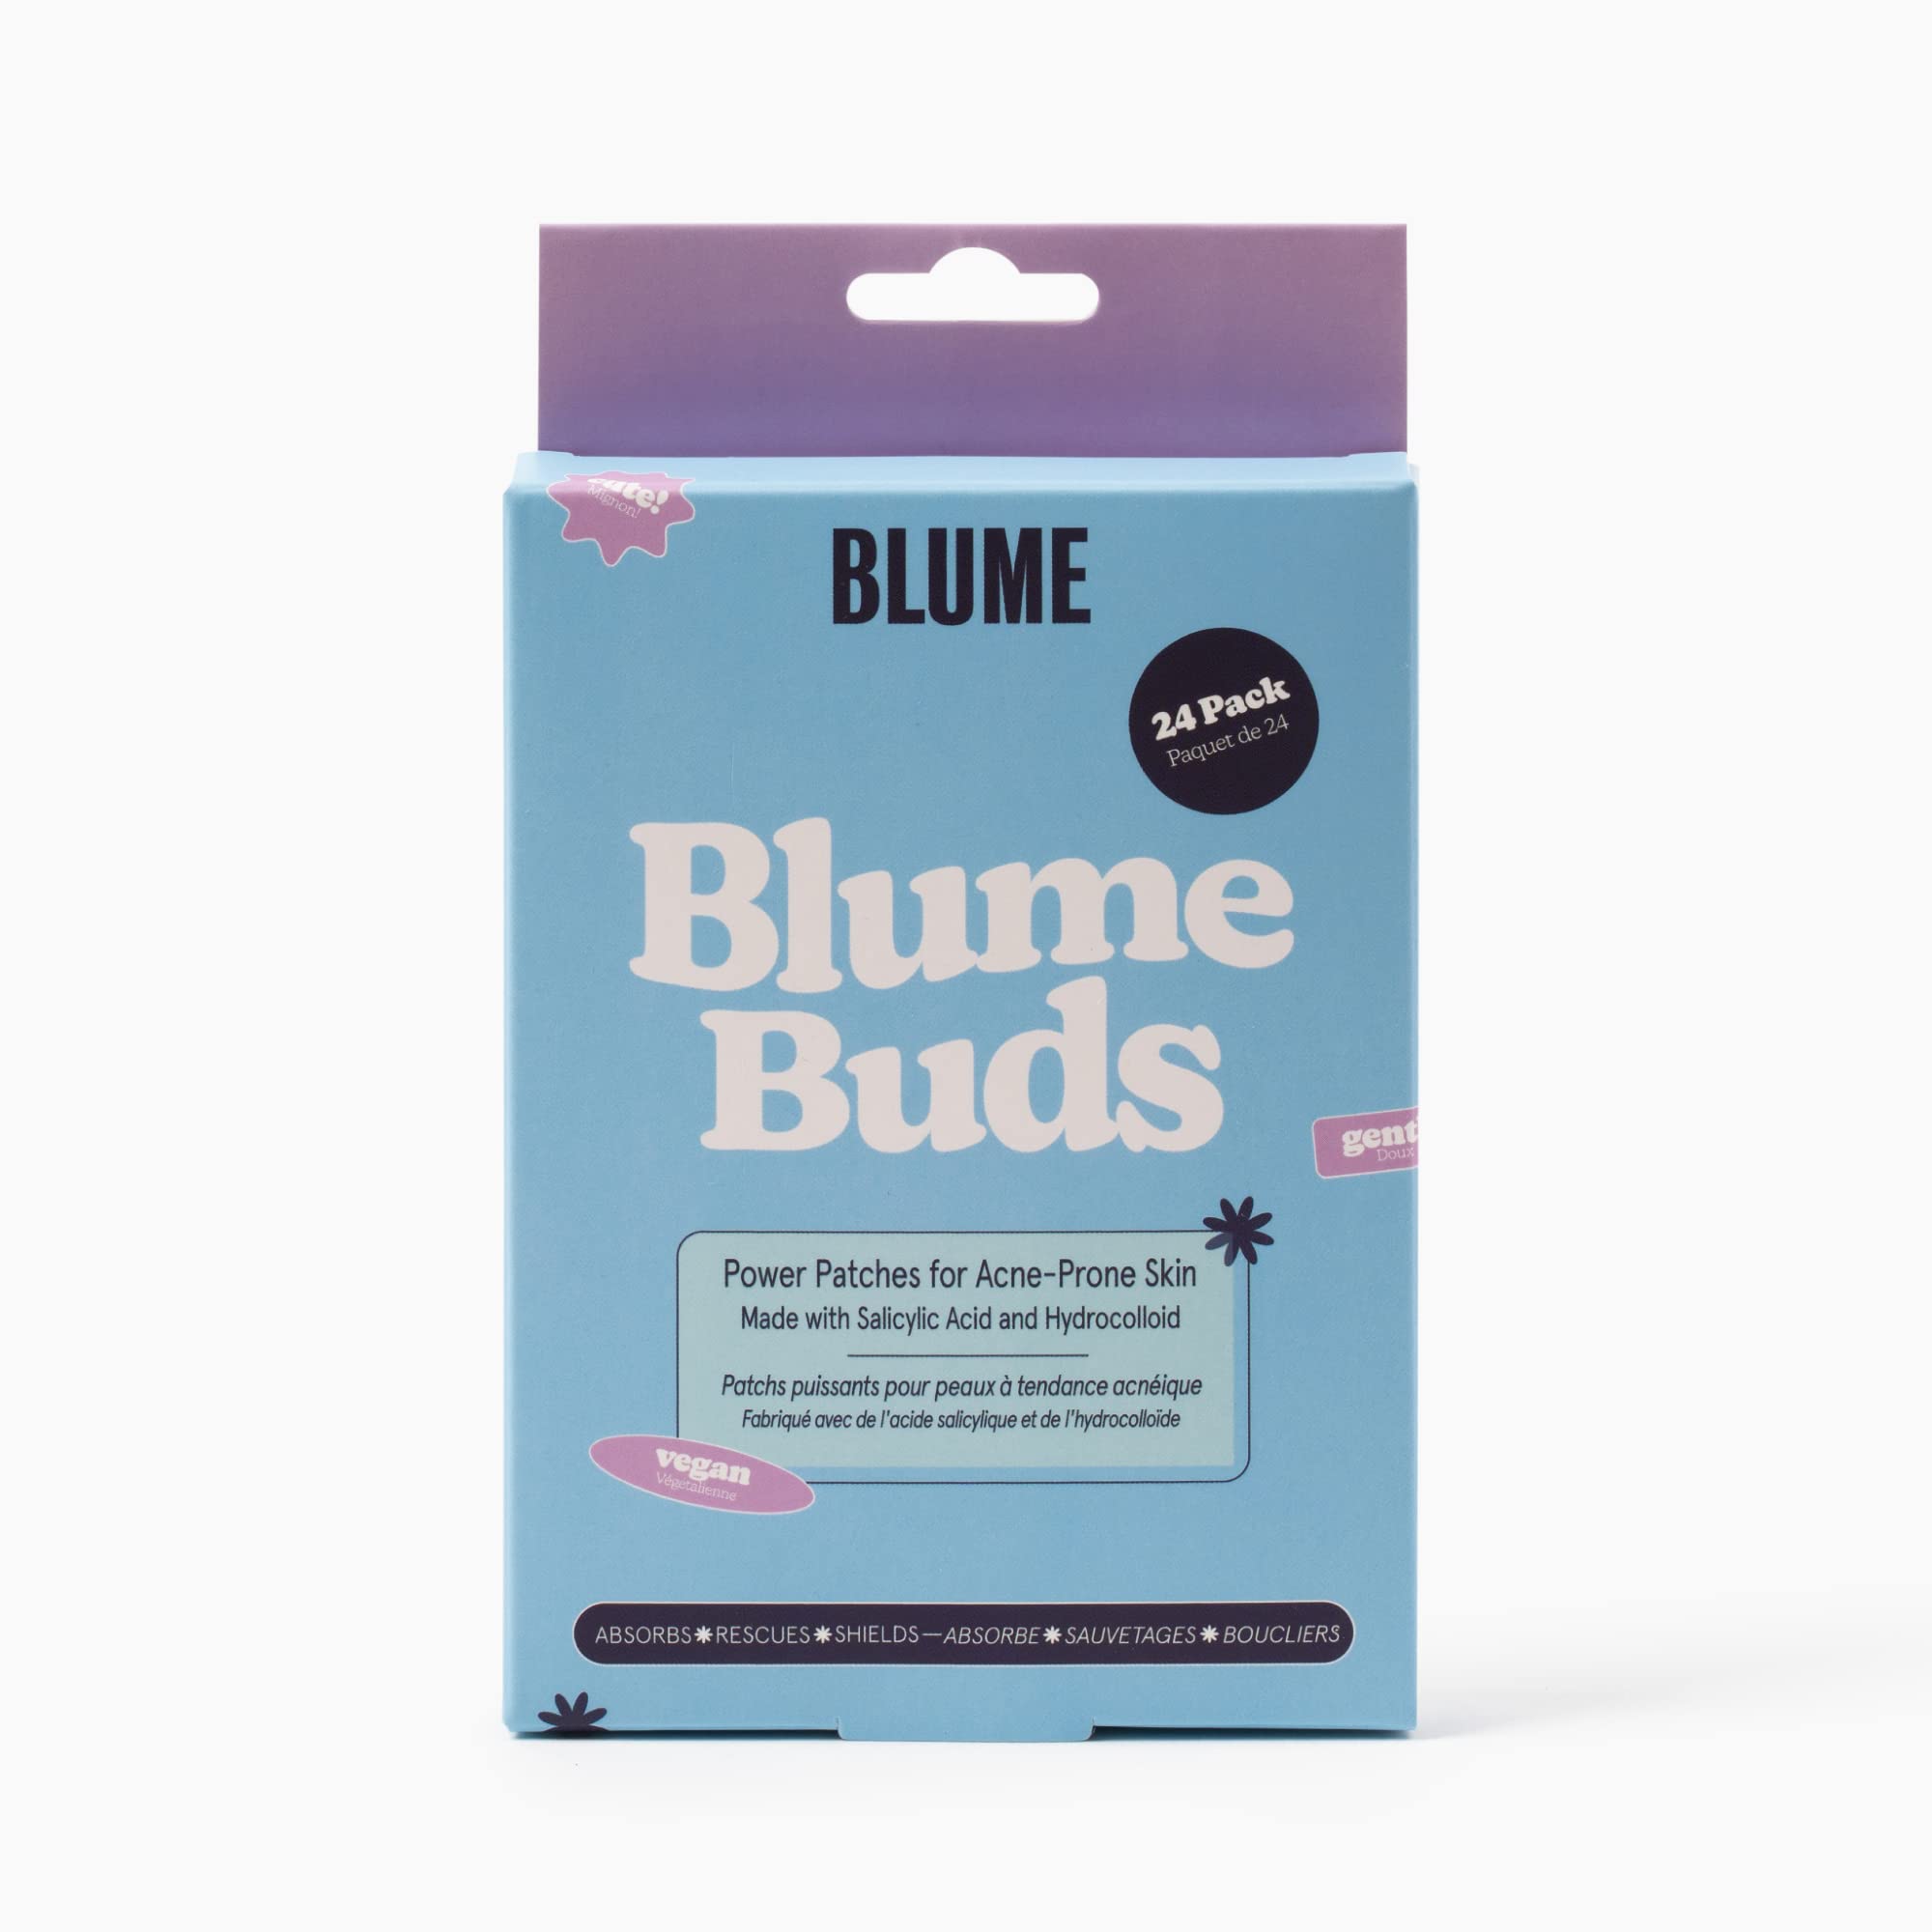 Blume Buds Power Acne Patches - Unscented Salicylic Acid + Hydrocolloid Patches - Calming Biodegradable Pimple Patches & Zit Stickers for All Skin Types (24 count)